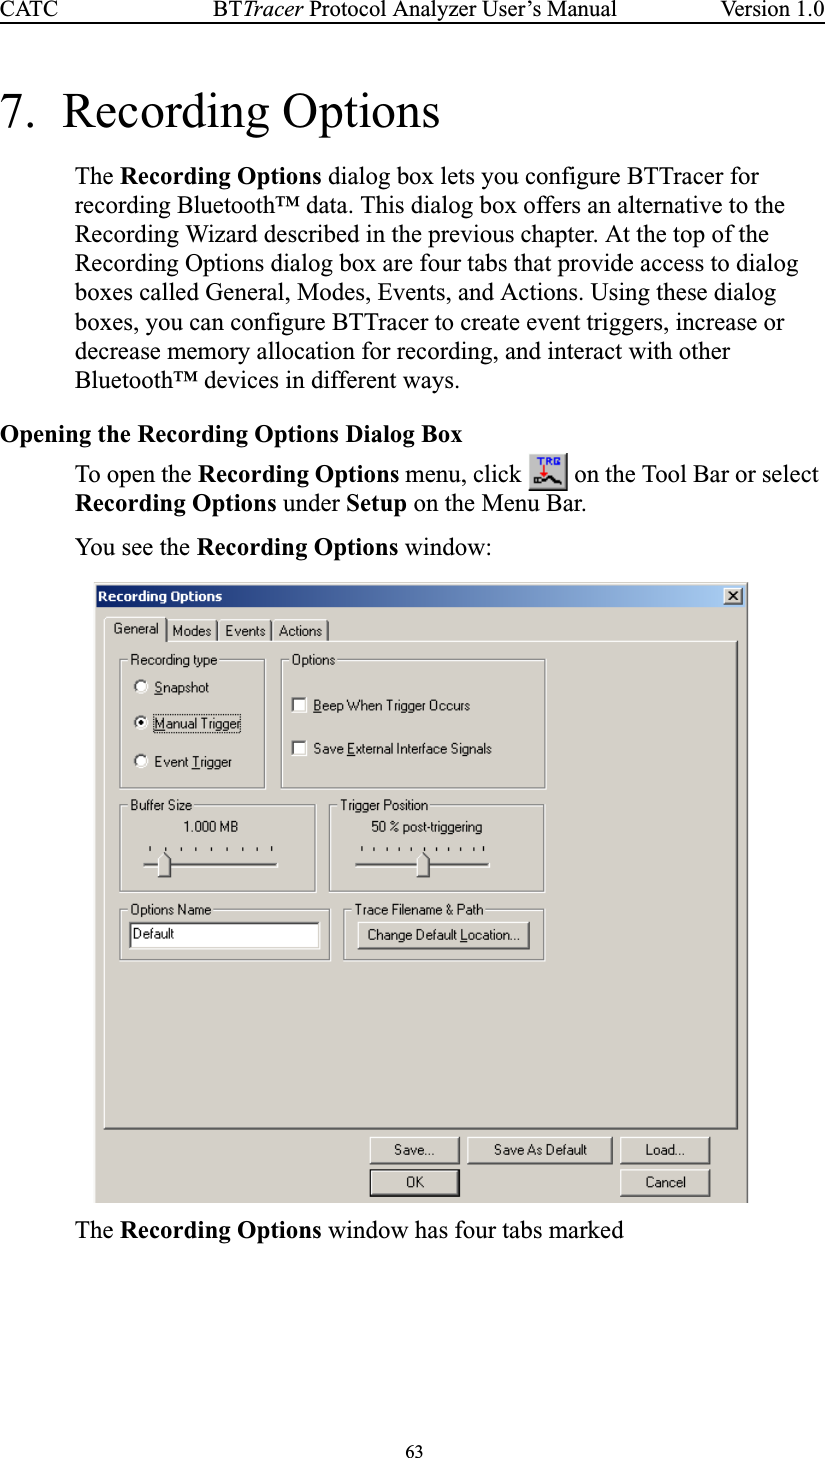 63BTTracer Protocol Analyzer User’s ManualCATC Version 1.07. Recording OptionsThe Recording Options dialog box lets you configure BTTracer forrecording Bluetooth™ data. This dialog box offers an alternative to theRecording Wizard described in the previous chapter. At the top of theRecording Options dialog box are four tabs that provide access to dialogboxes called General, Modes, Events, and Actions. Using these dialogboxes, you can configure BTTracer to create event triggers, increase ordecrease memory allocation for recording, and interact with otherBluetooth™ devices in different ways.Opening the Recording Options Dialog BoxTo open the Recording Options menu, click on the Tool Bar or selectRecording Options under Setup on the Menu Bar.You se e the Recording Options window:The Recording Options window has four tabs marked